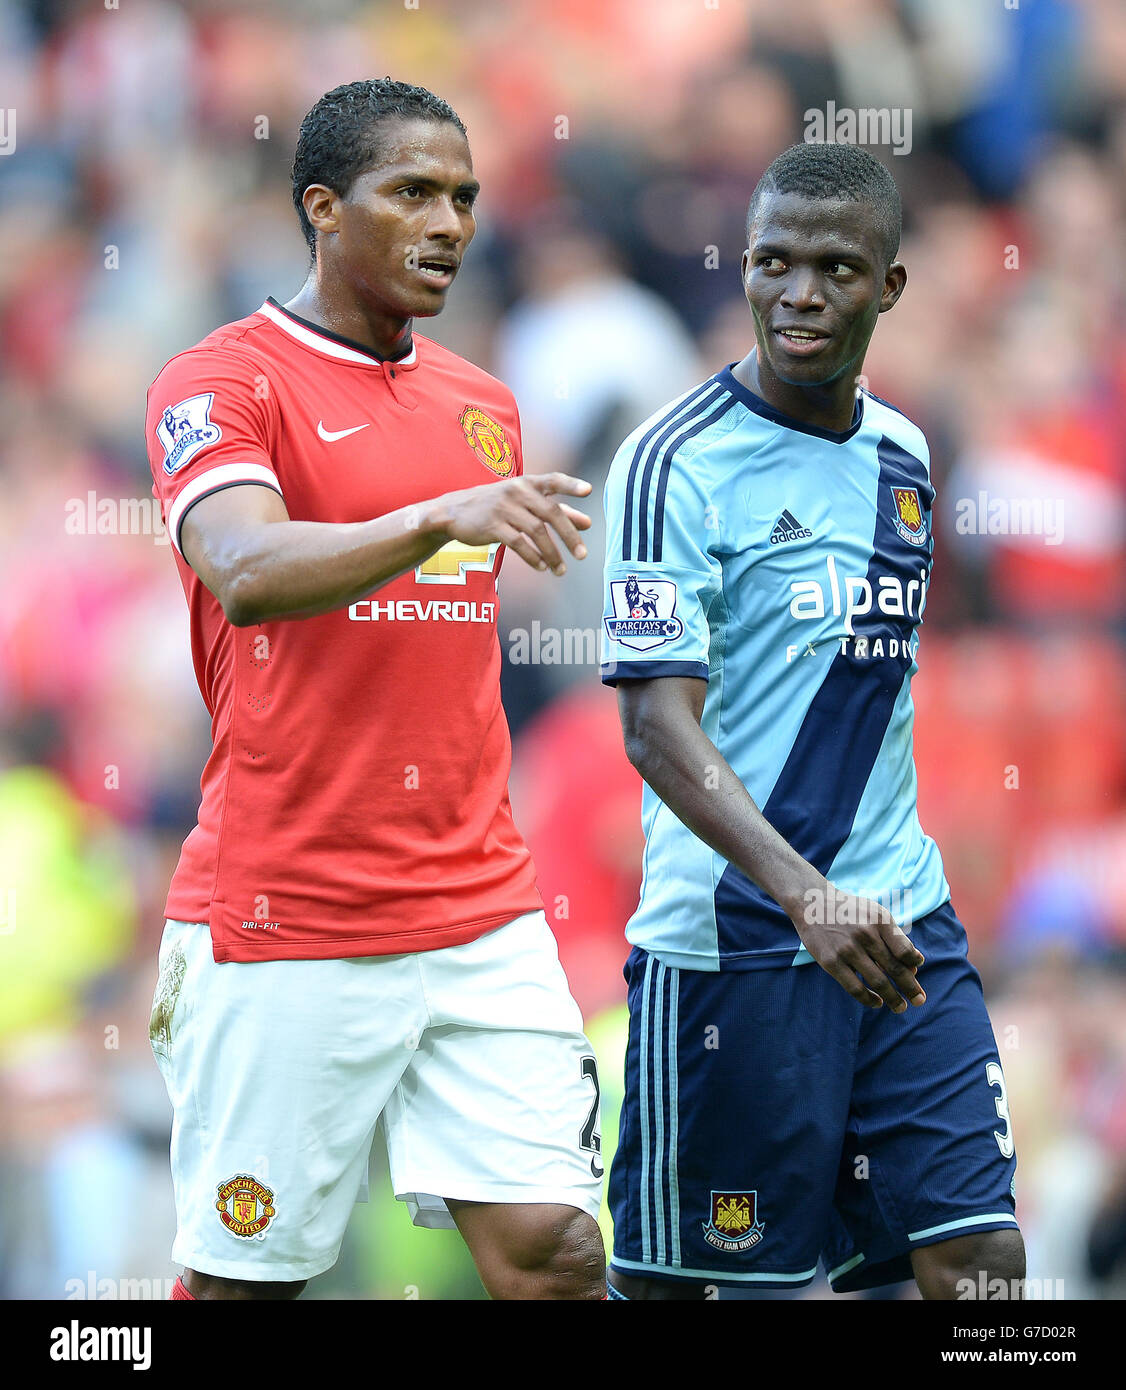 Manchester United's Antonio Valencia leaves the field with West Ham United's Enner Valencia during the Barclays Premier League match at Old Trafford, Manchester. Stock Photo